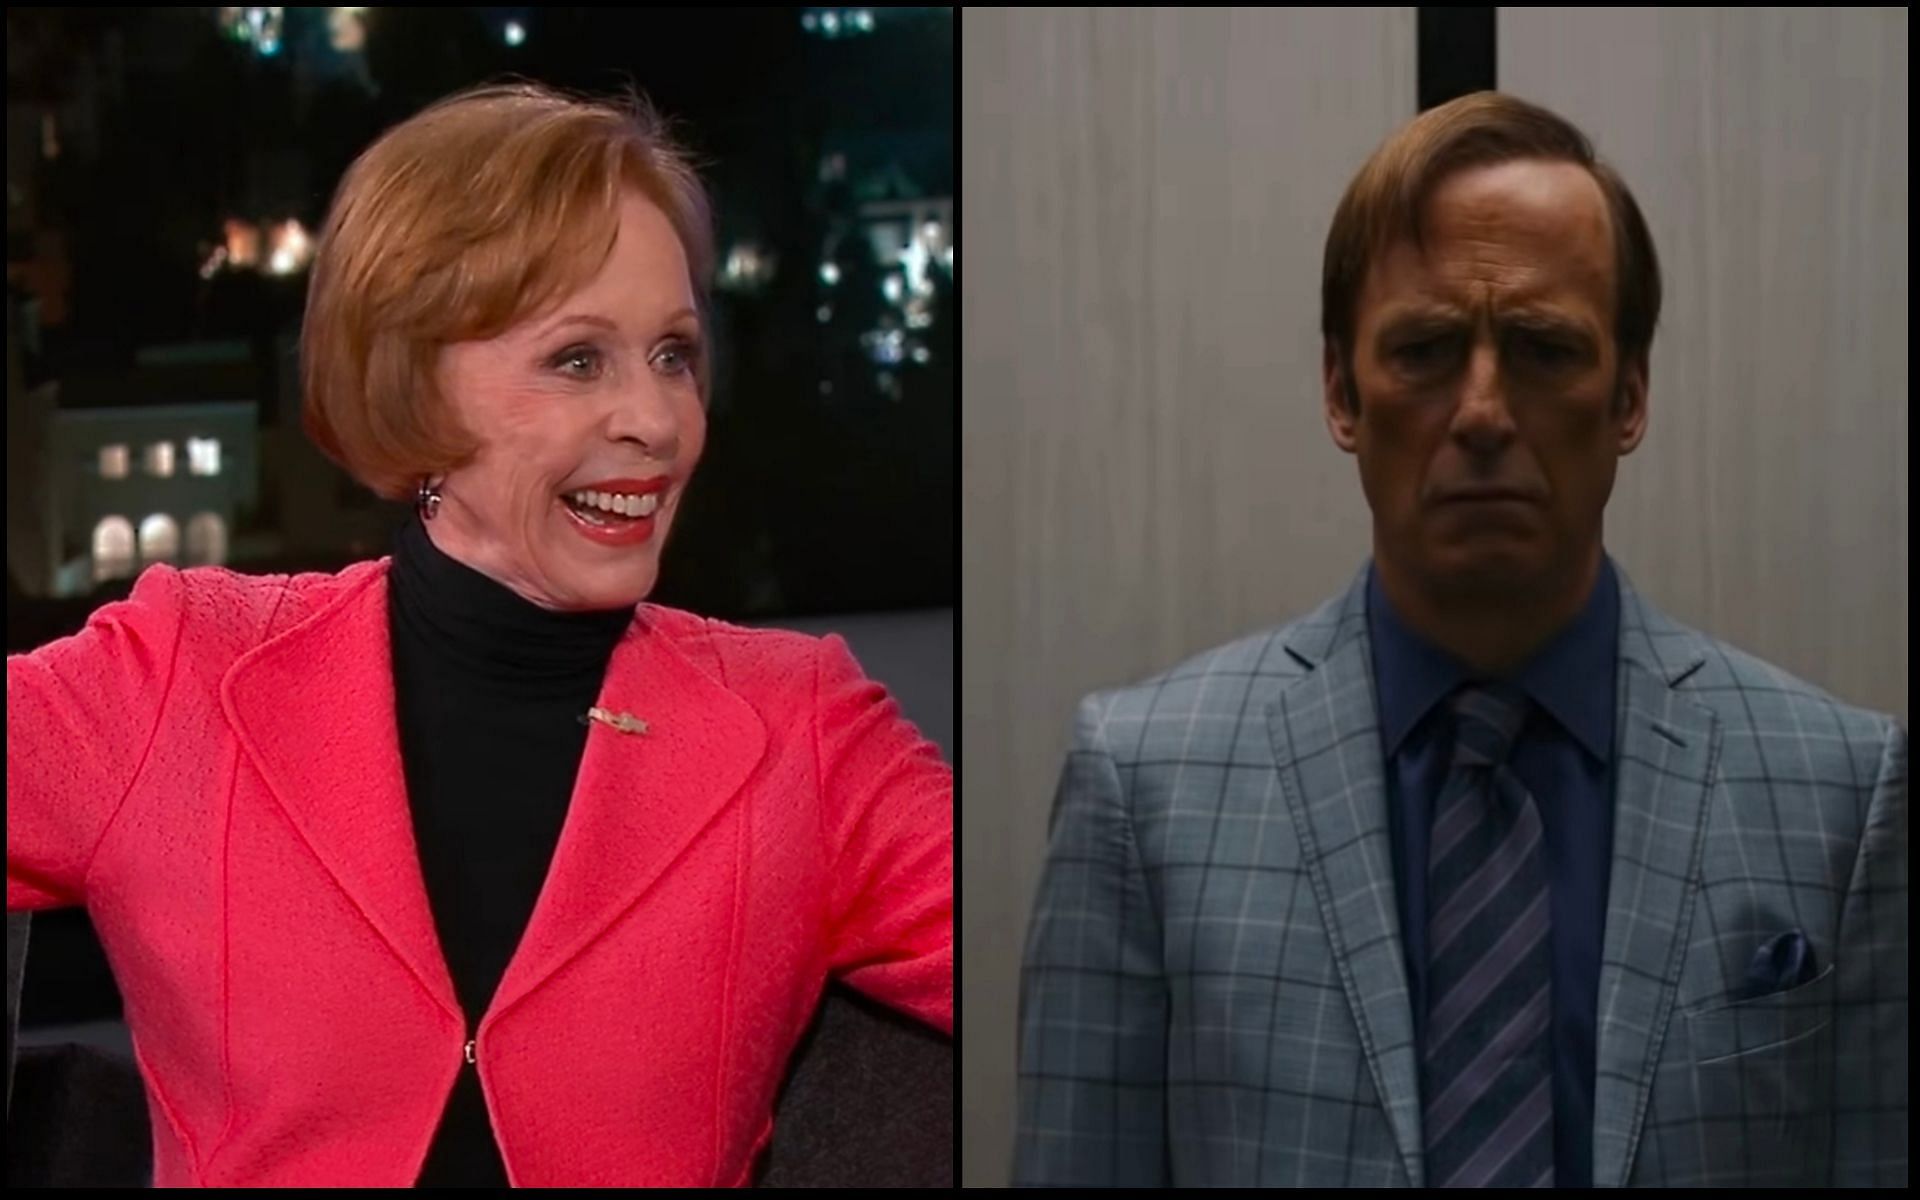 The Carol Burnett Show host is set to guest star on Better Call Saul (Image via Jimmy Kimmel Live! and AMC)